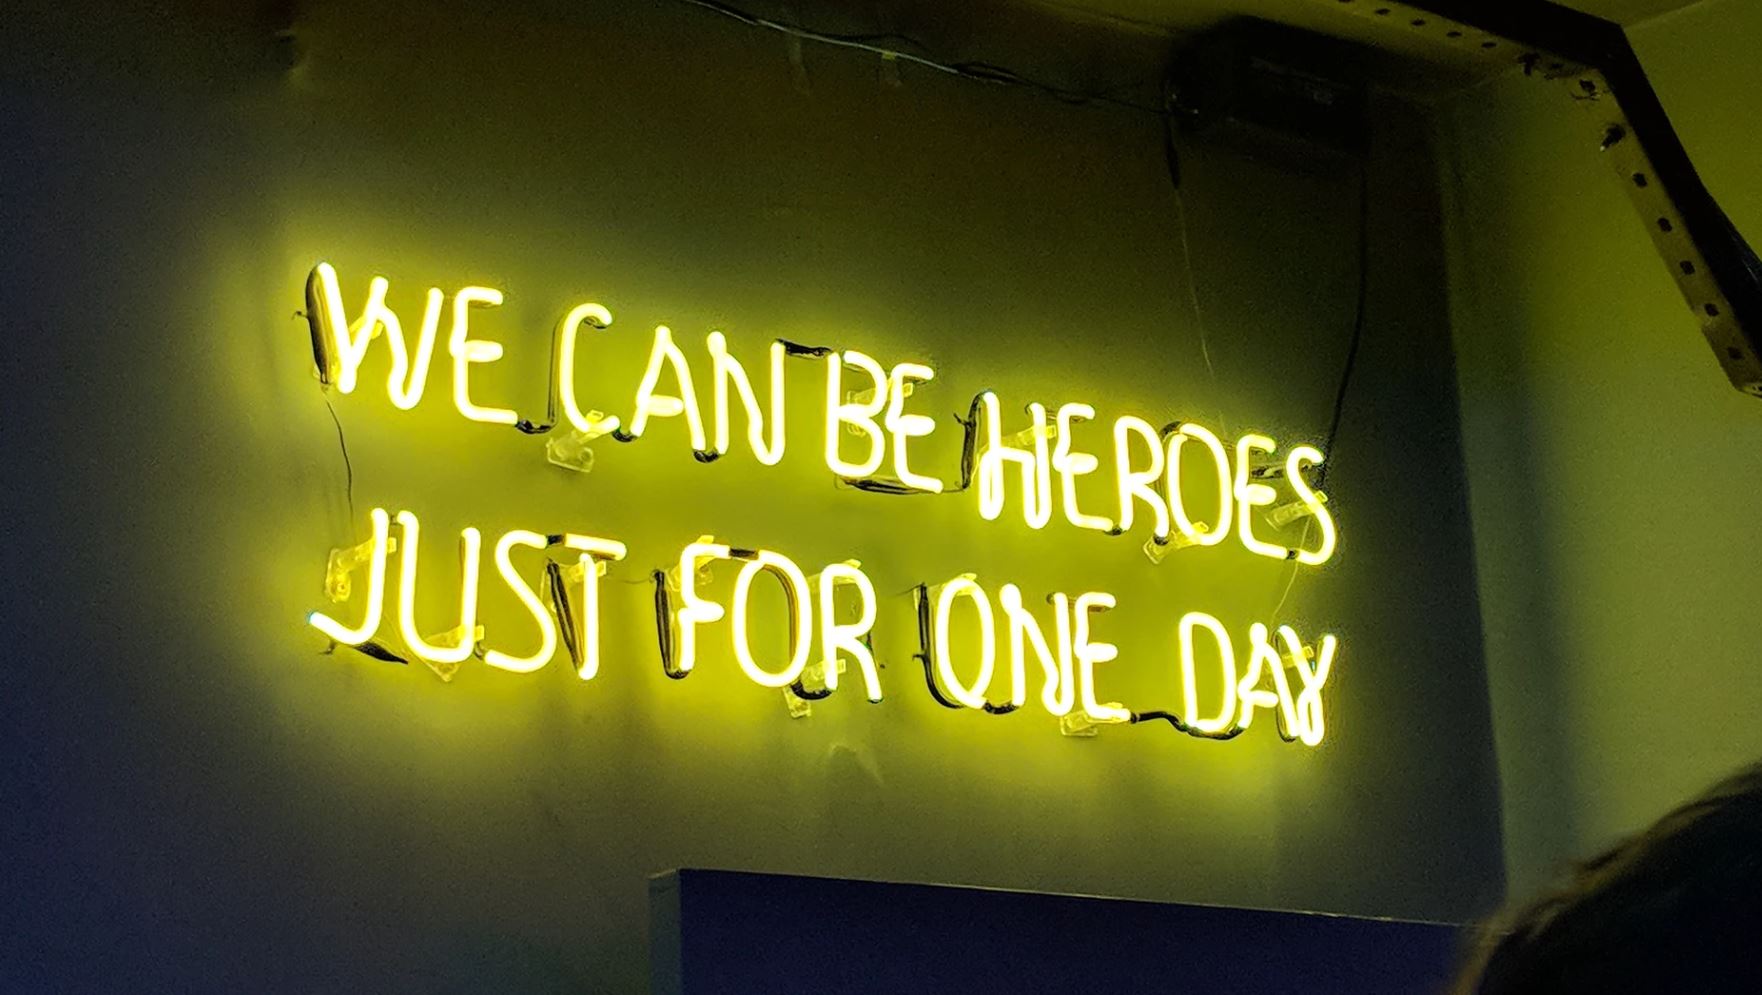 We can be heroes just for one day!